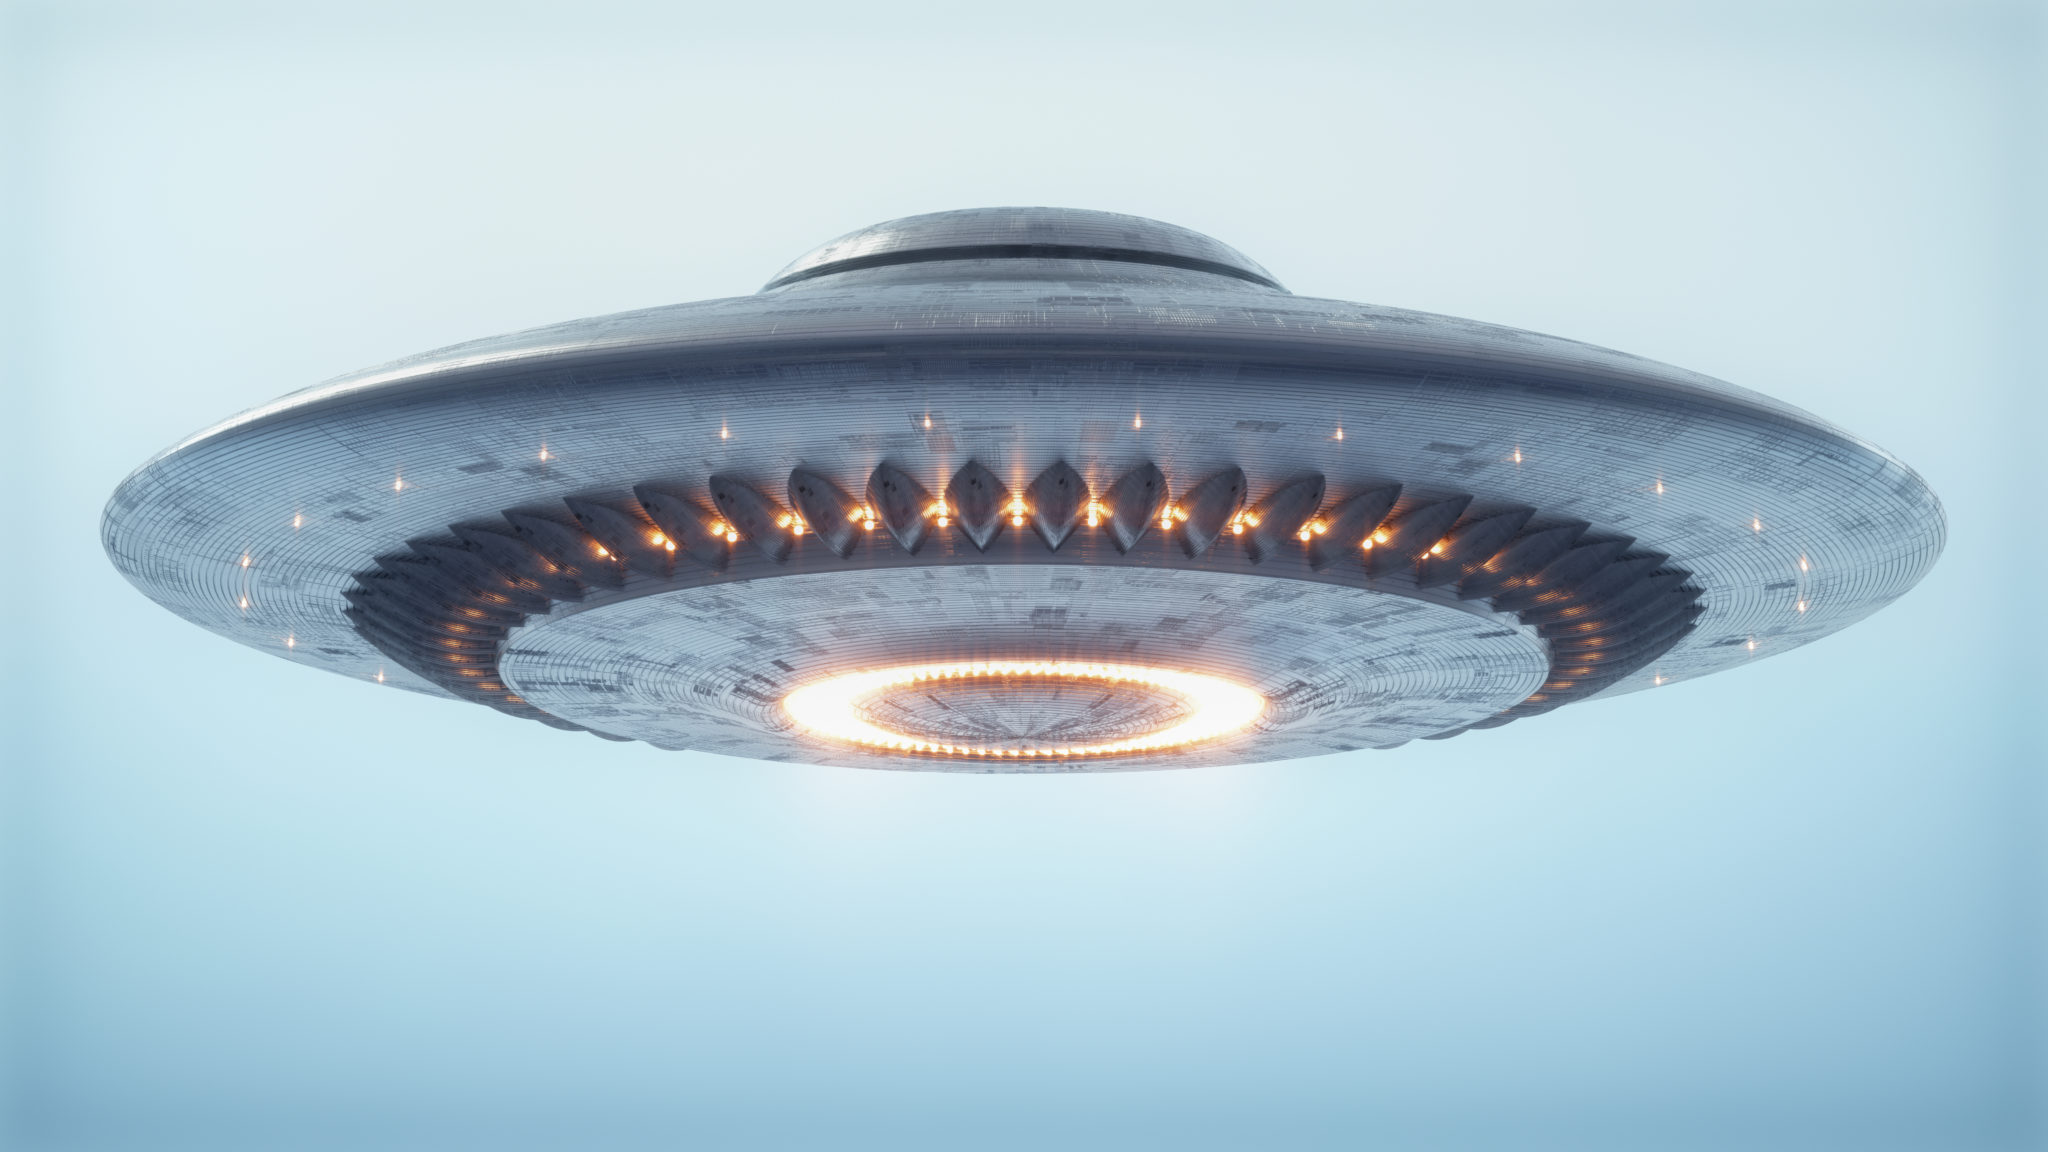 Unidentified,Flying,Object.,Ufo,With,Clipping,Path,Included.,3d,Illustration.